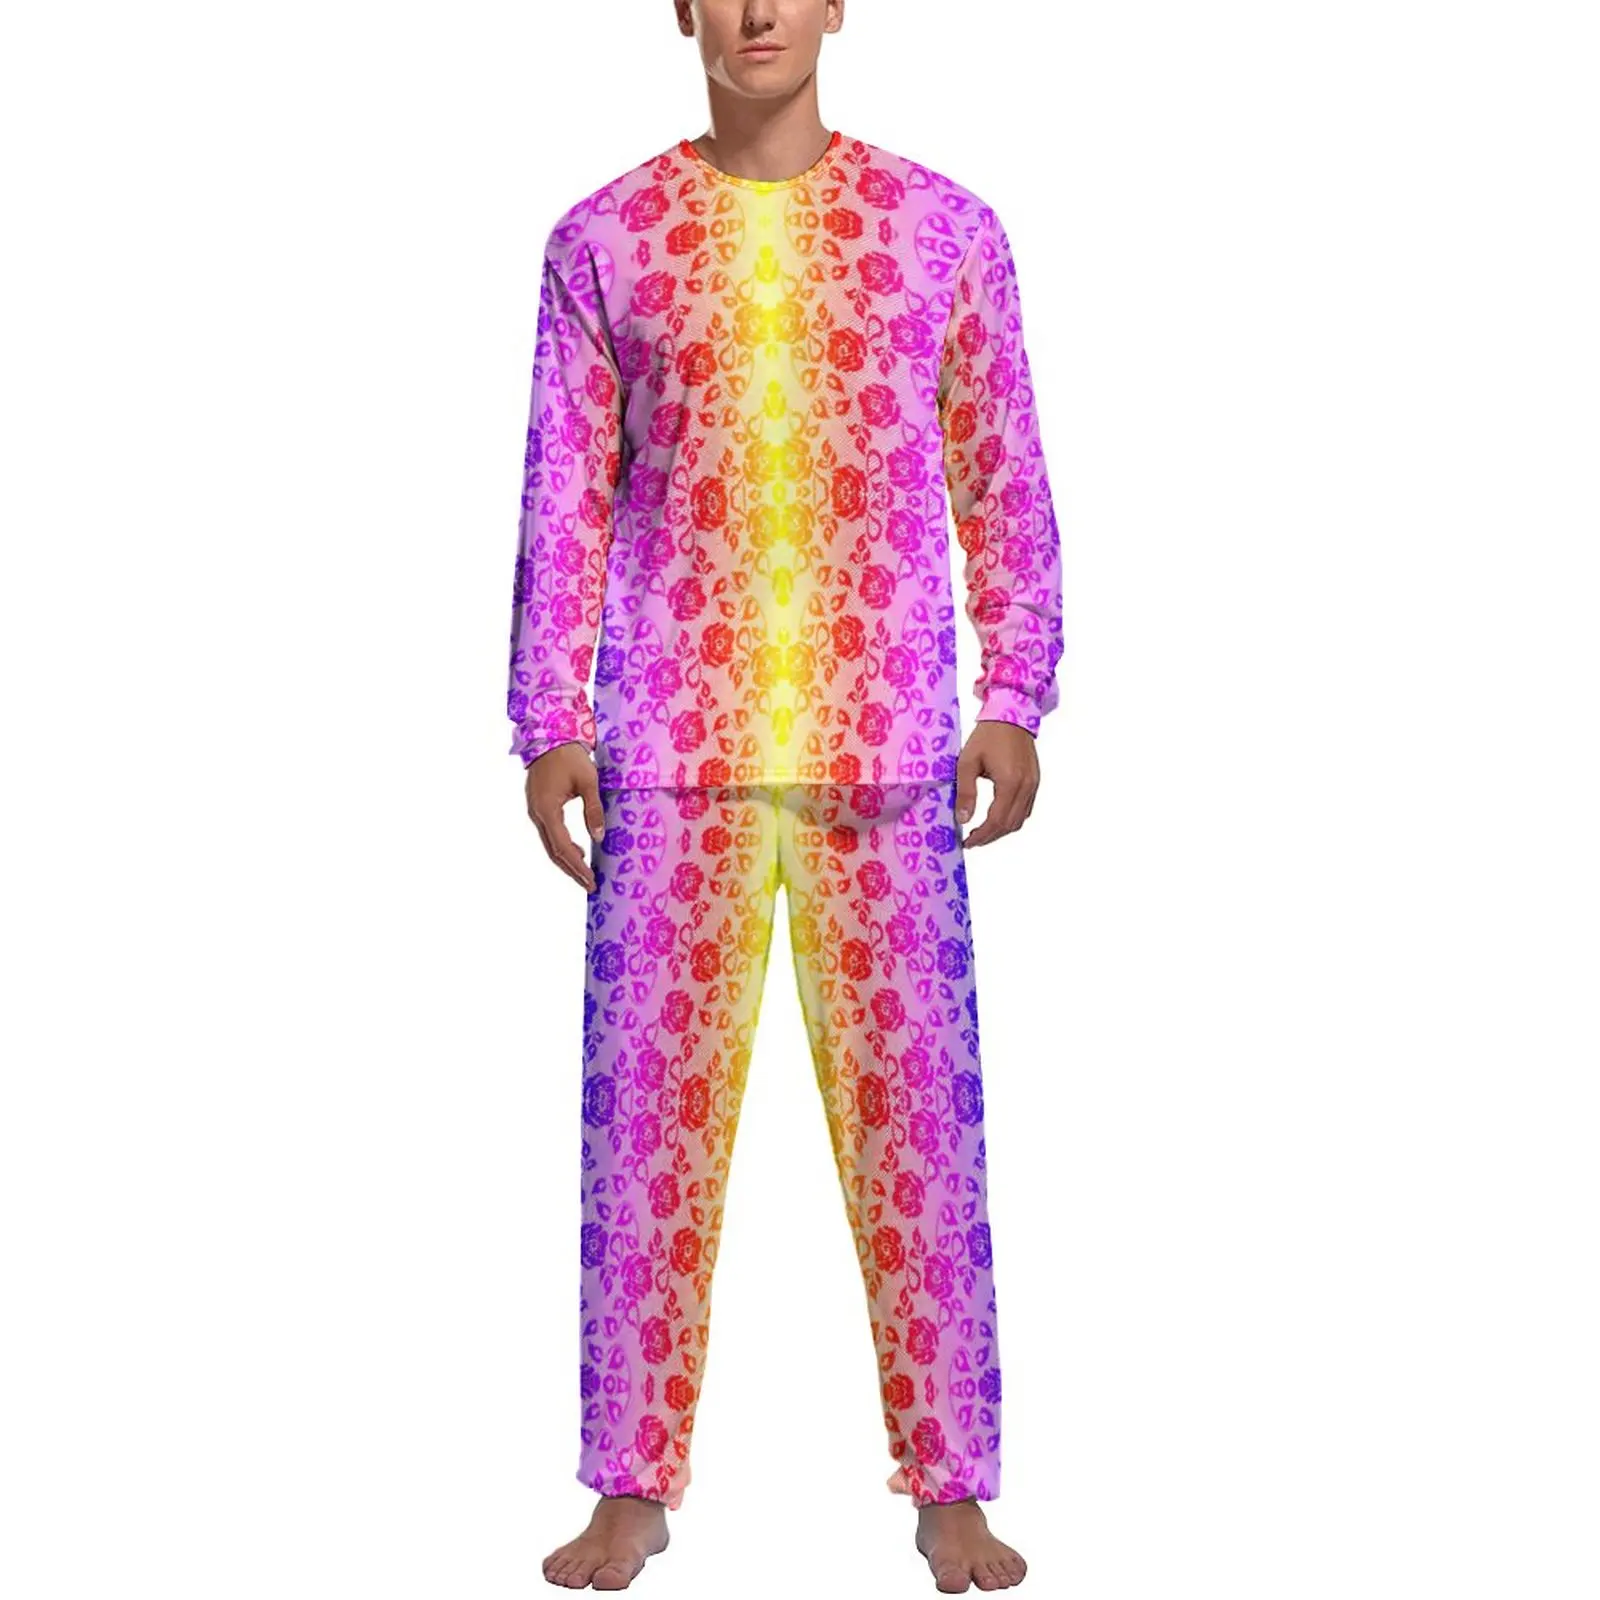 

Faux Roses Pajamas Male Lace Fishnet Colorful Romantic Nightwear Spring Long Sleeves 2 Pieces Casual Design Pajama Sets